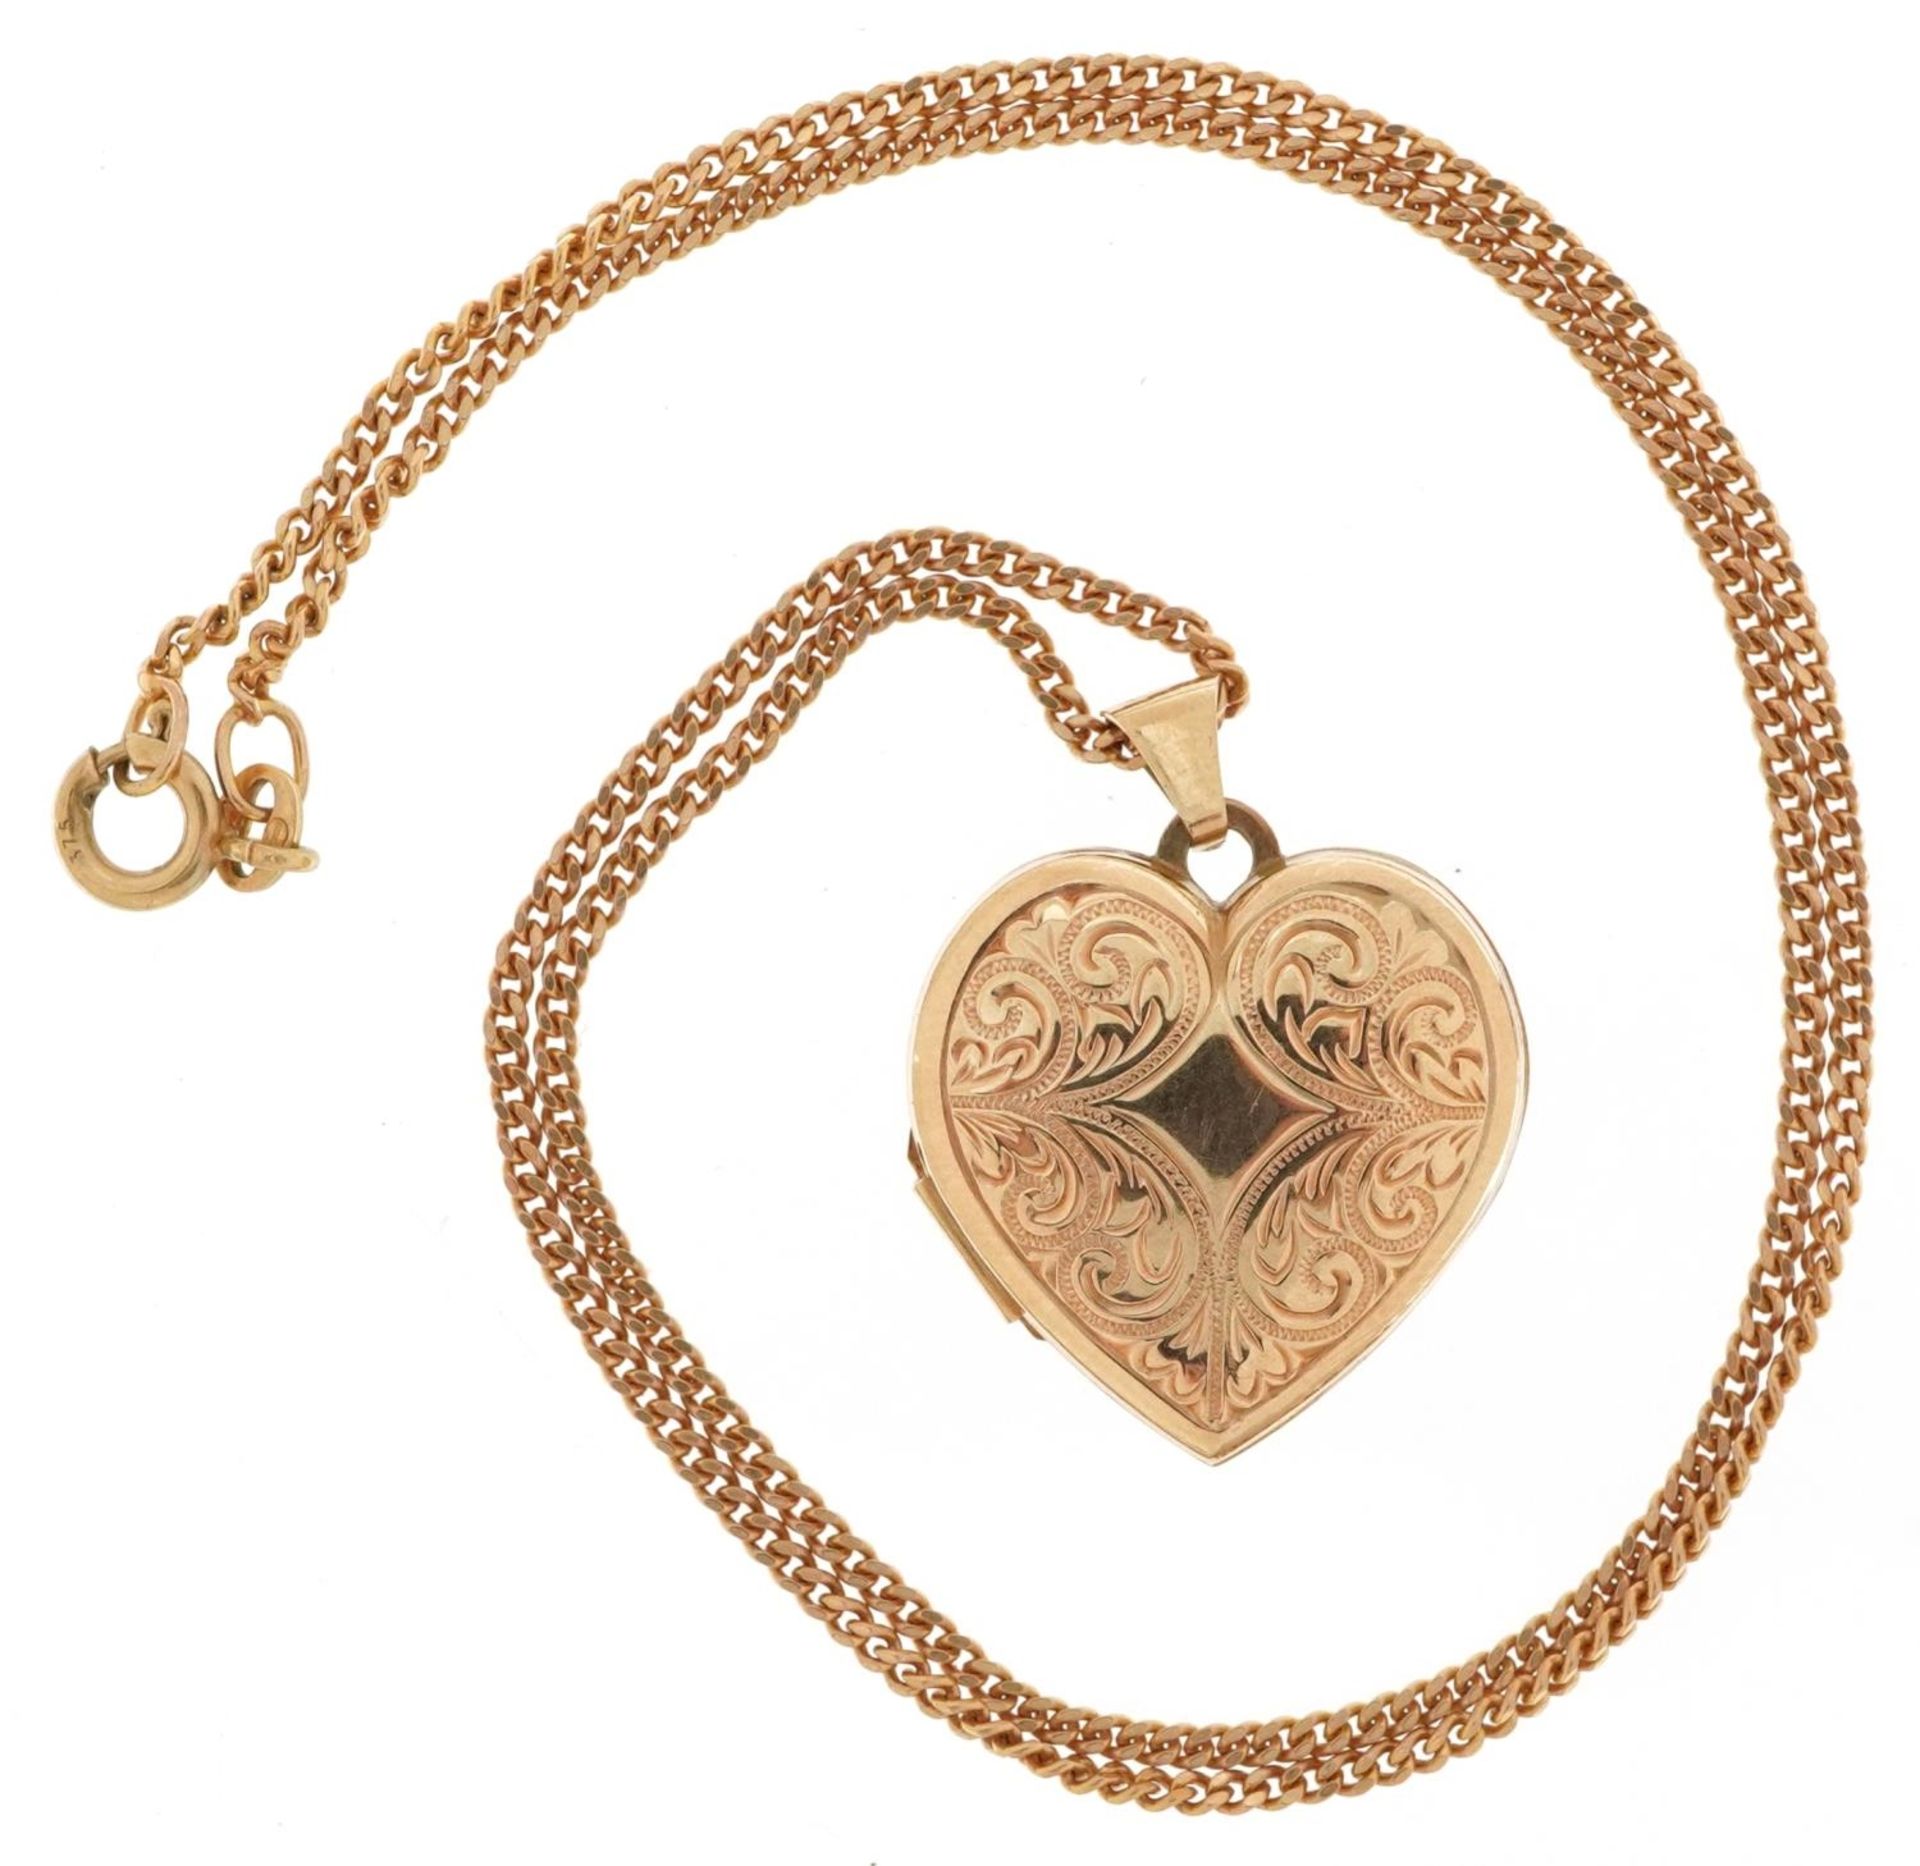 9ct gold floral engraved love heart locket on a 9ct gold necklace, 2.7cm high and 40cm in length, - Image 2 of 6